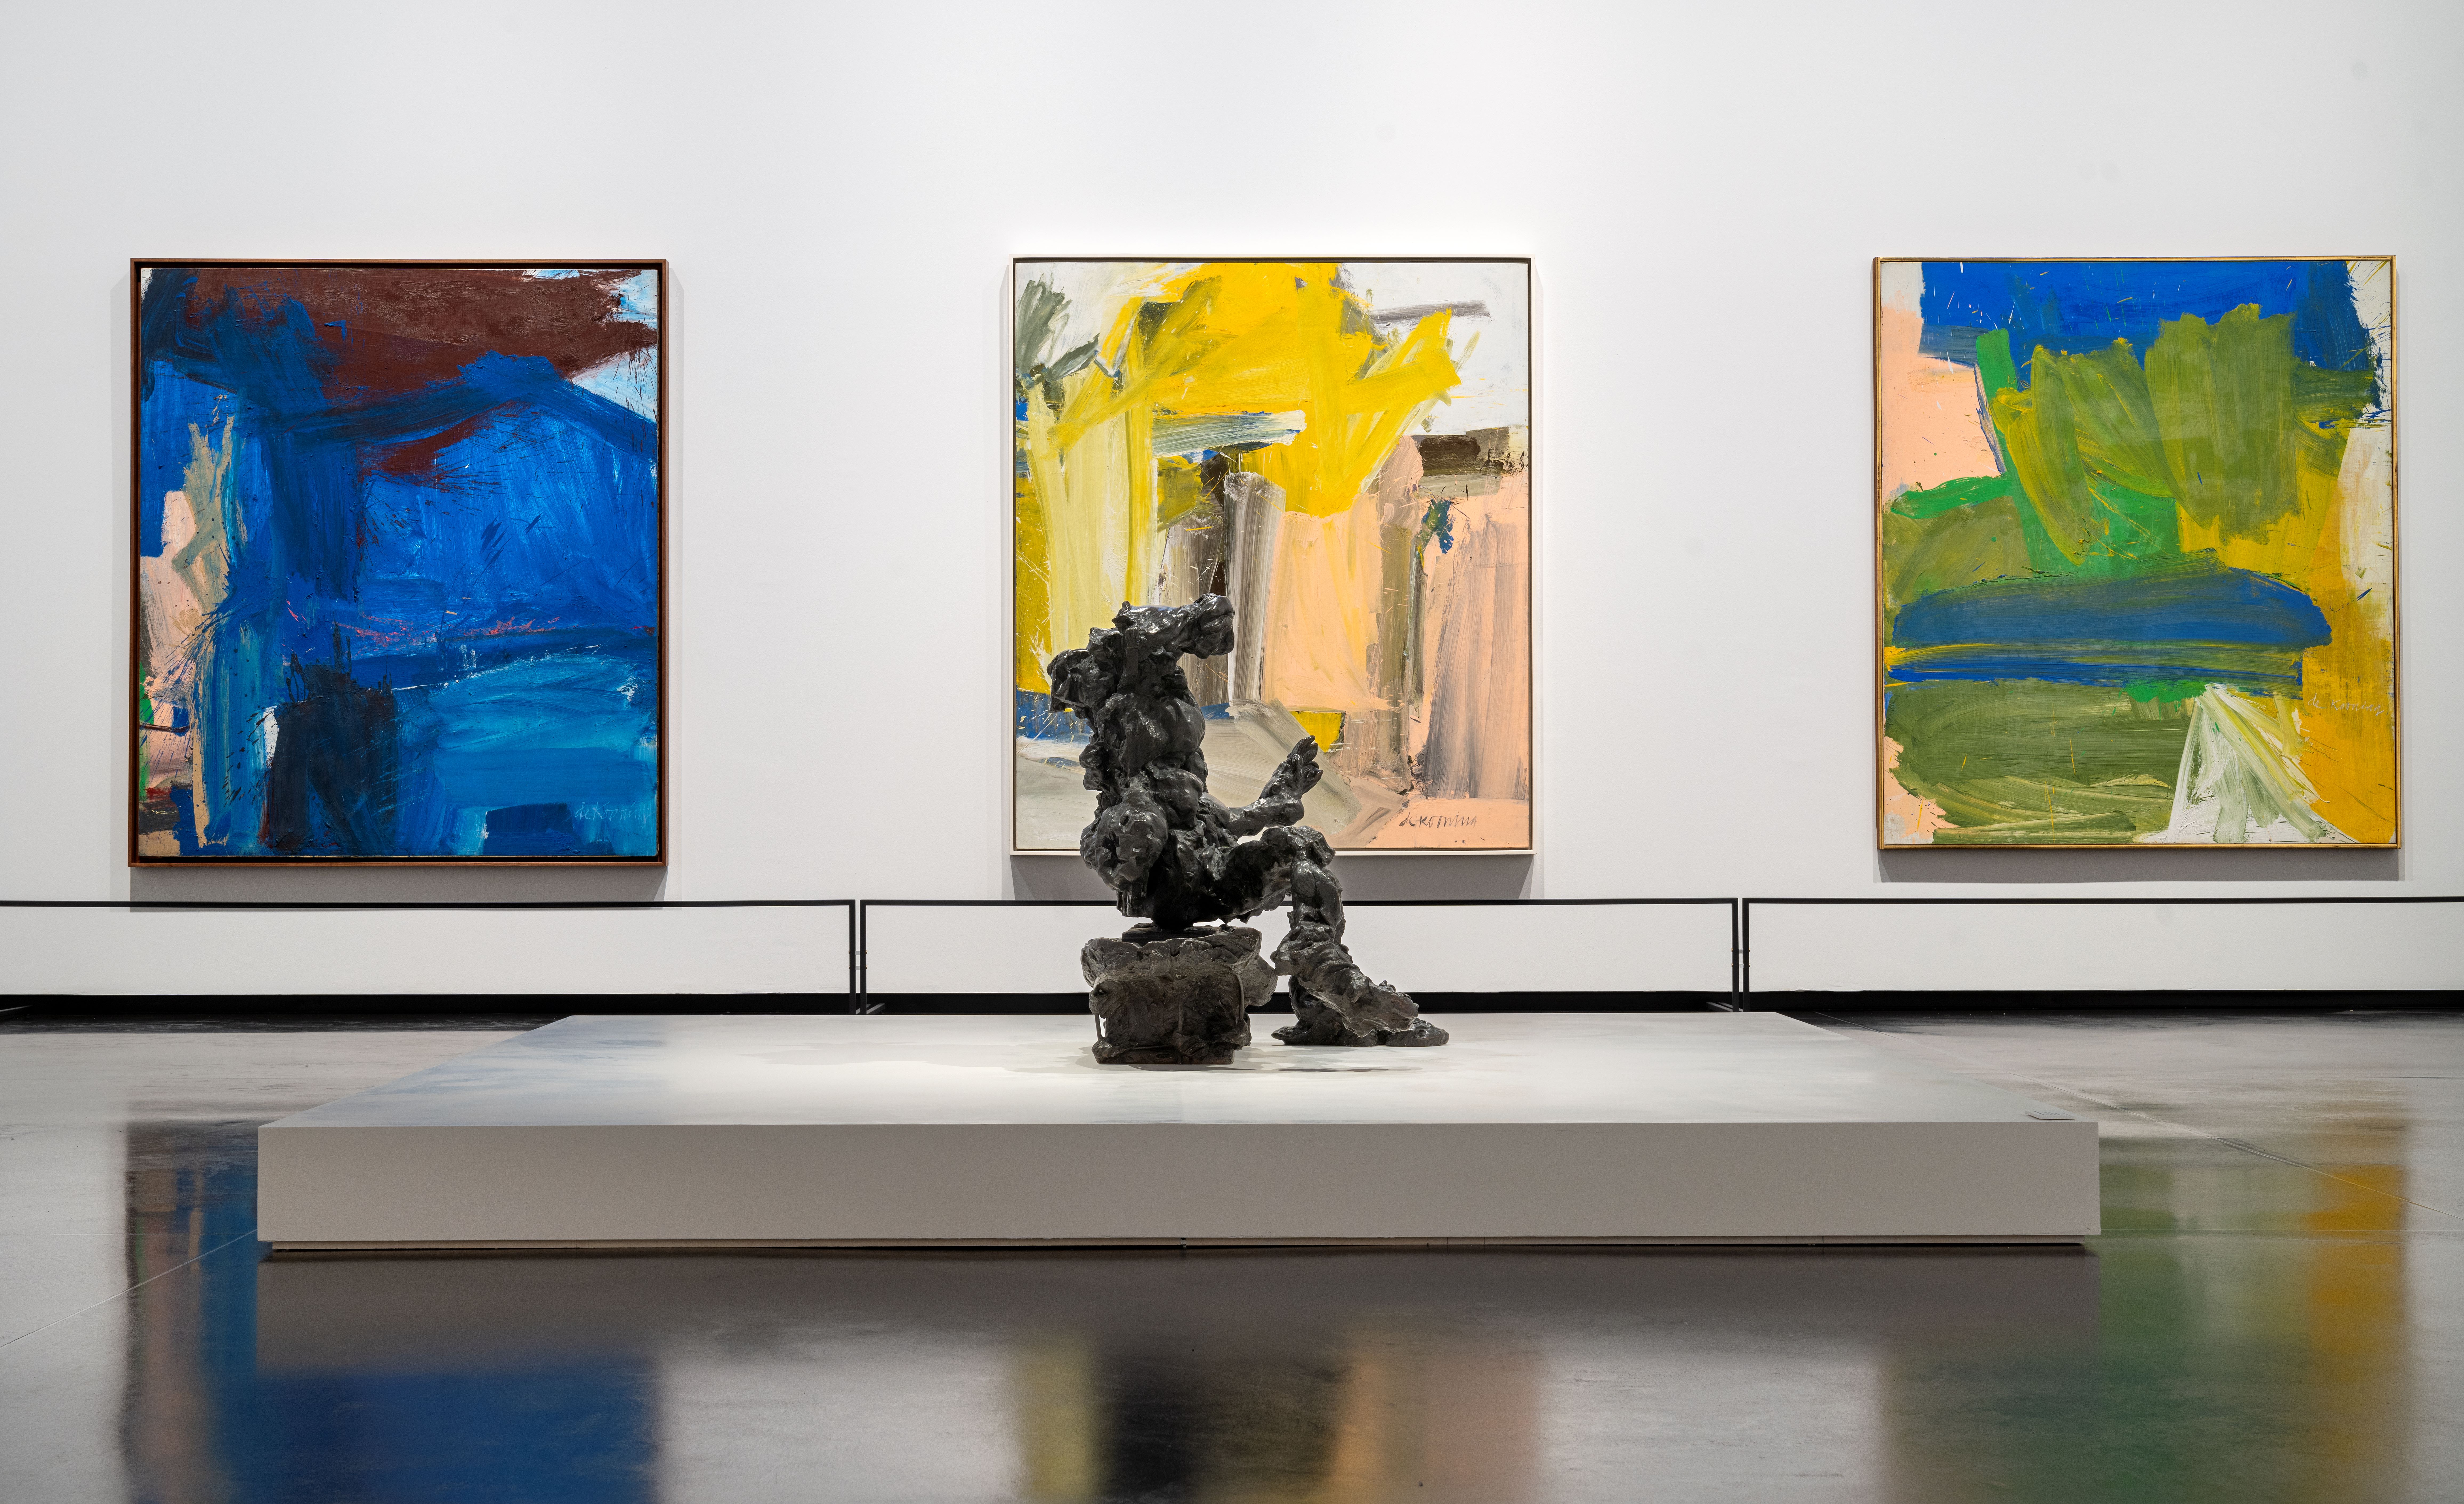 Installation View_Willem de Kooning and Italy_Gallerie dell'Accademia, Venice, 2024 / © 2024 The Willem de Kooning Foundation, SIAE_Photo by Matte de Fina 2024